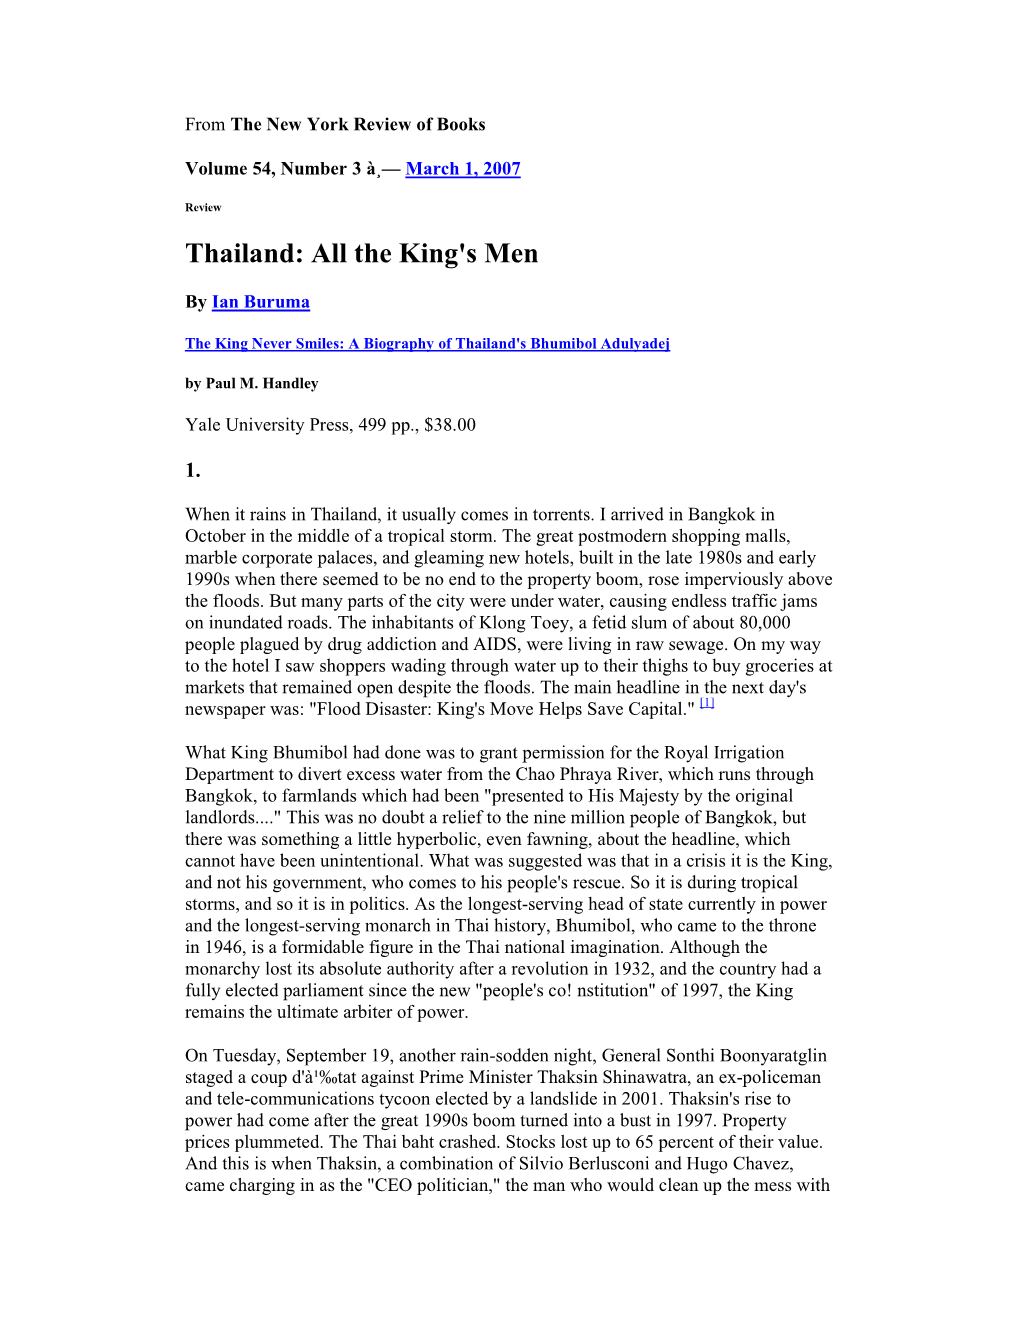 Thailand: All the King's Men